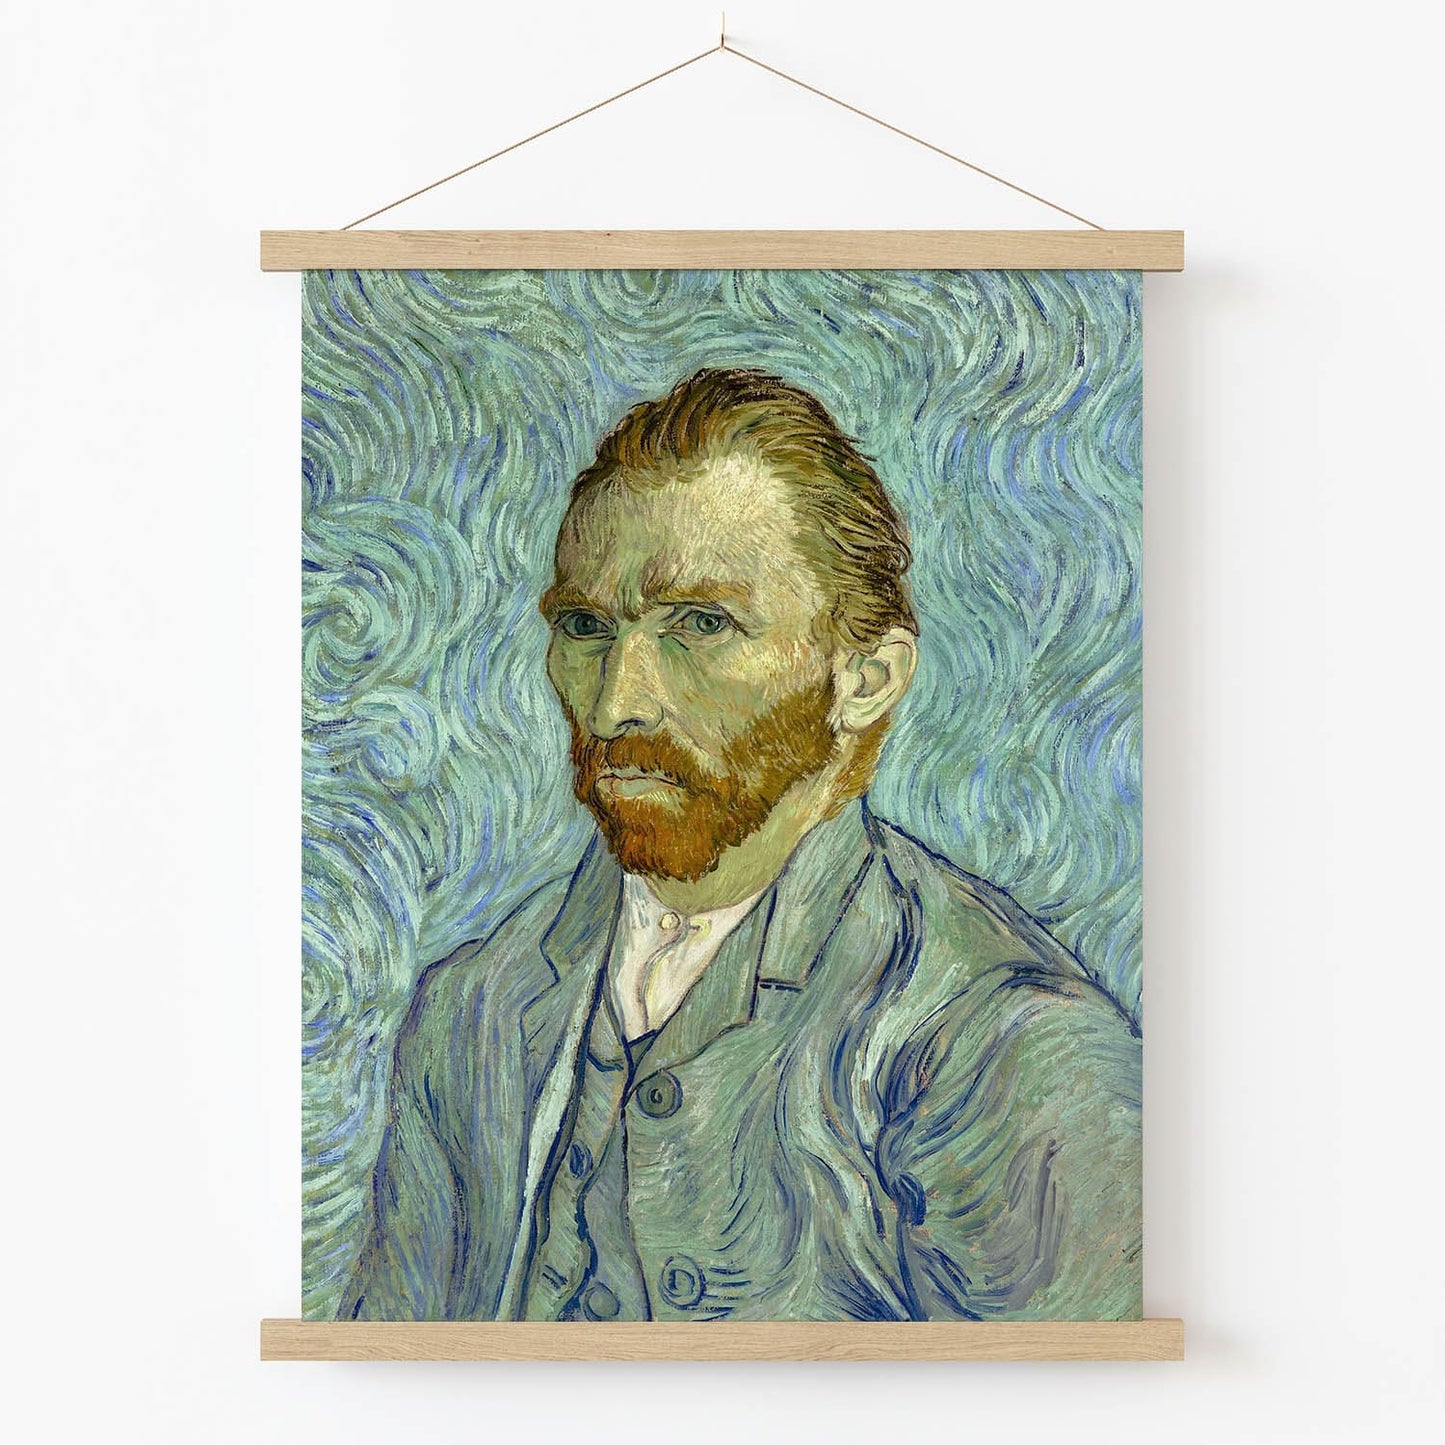 Colorful and Trippy van Gogh Art Print in Wood Hanger Frame on Wall